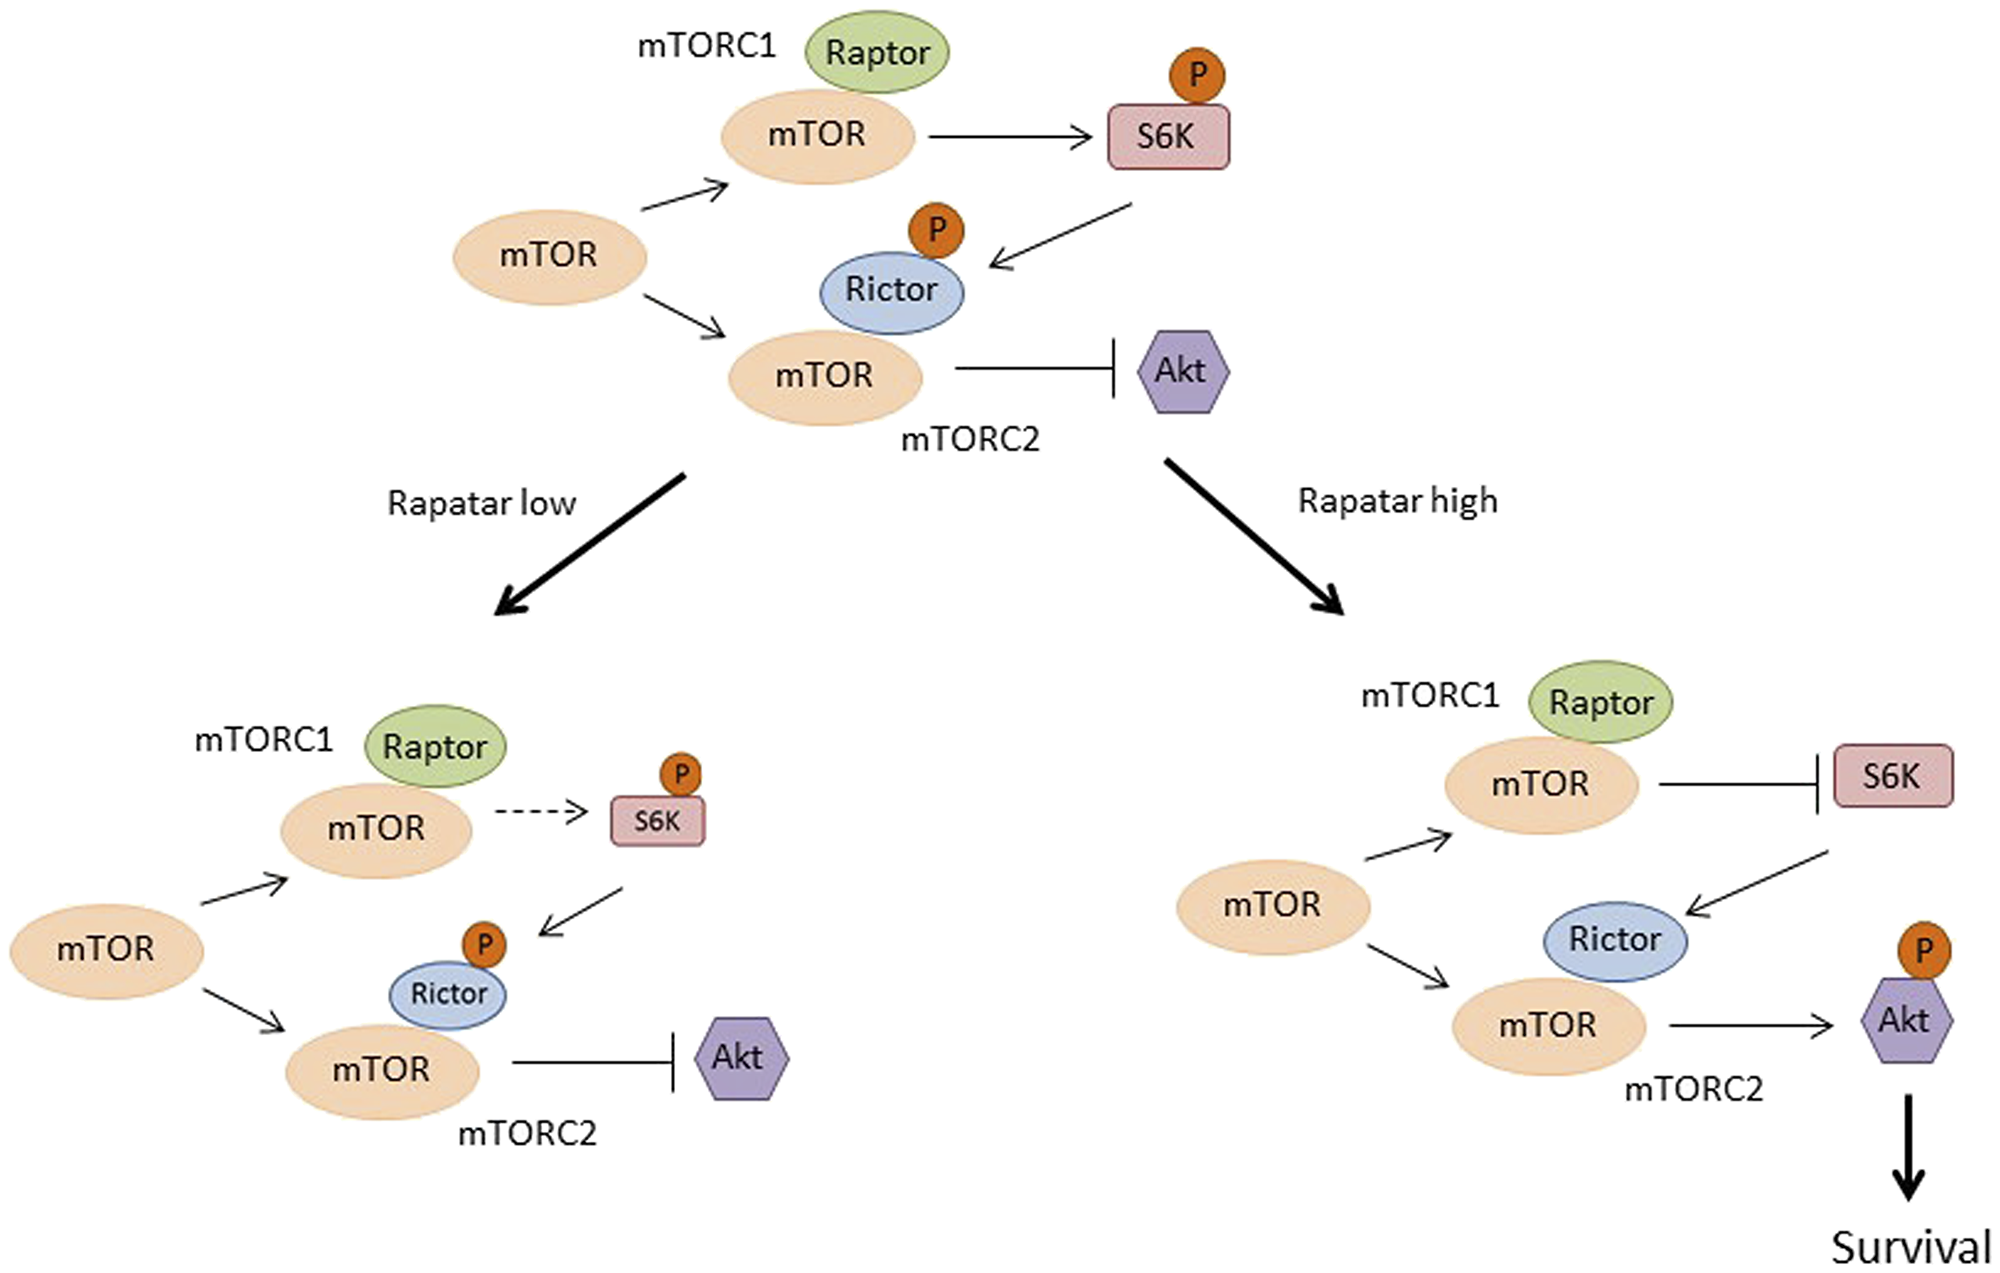 Proposed model explaining the differential tumor preventive effects of low and high doses of Rapatar on mTOR signaling in the psPten–/– mouse model.